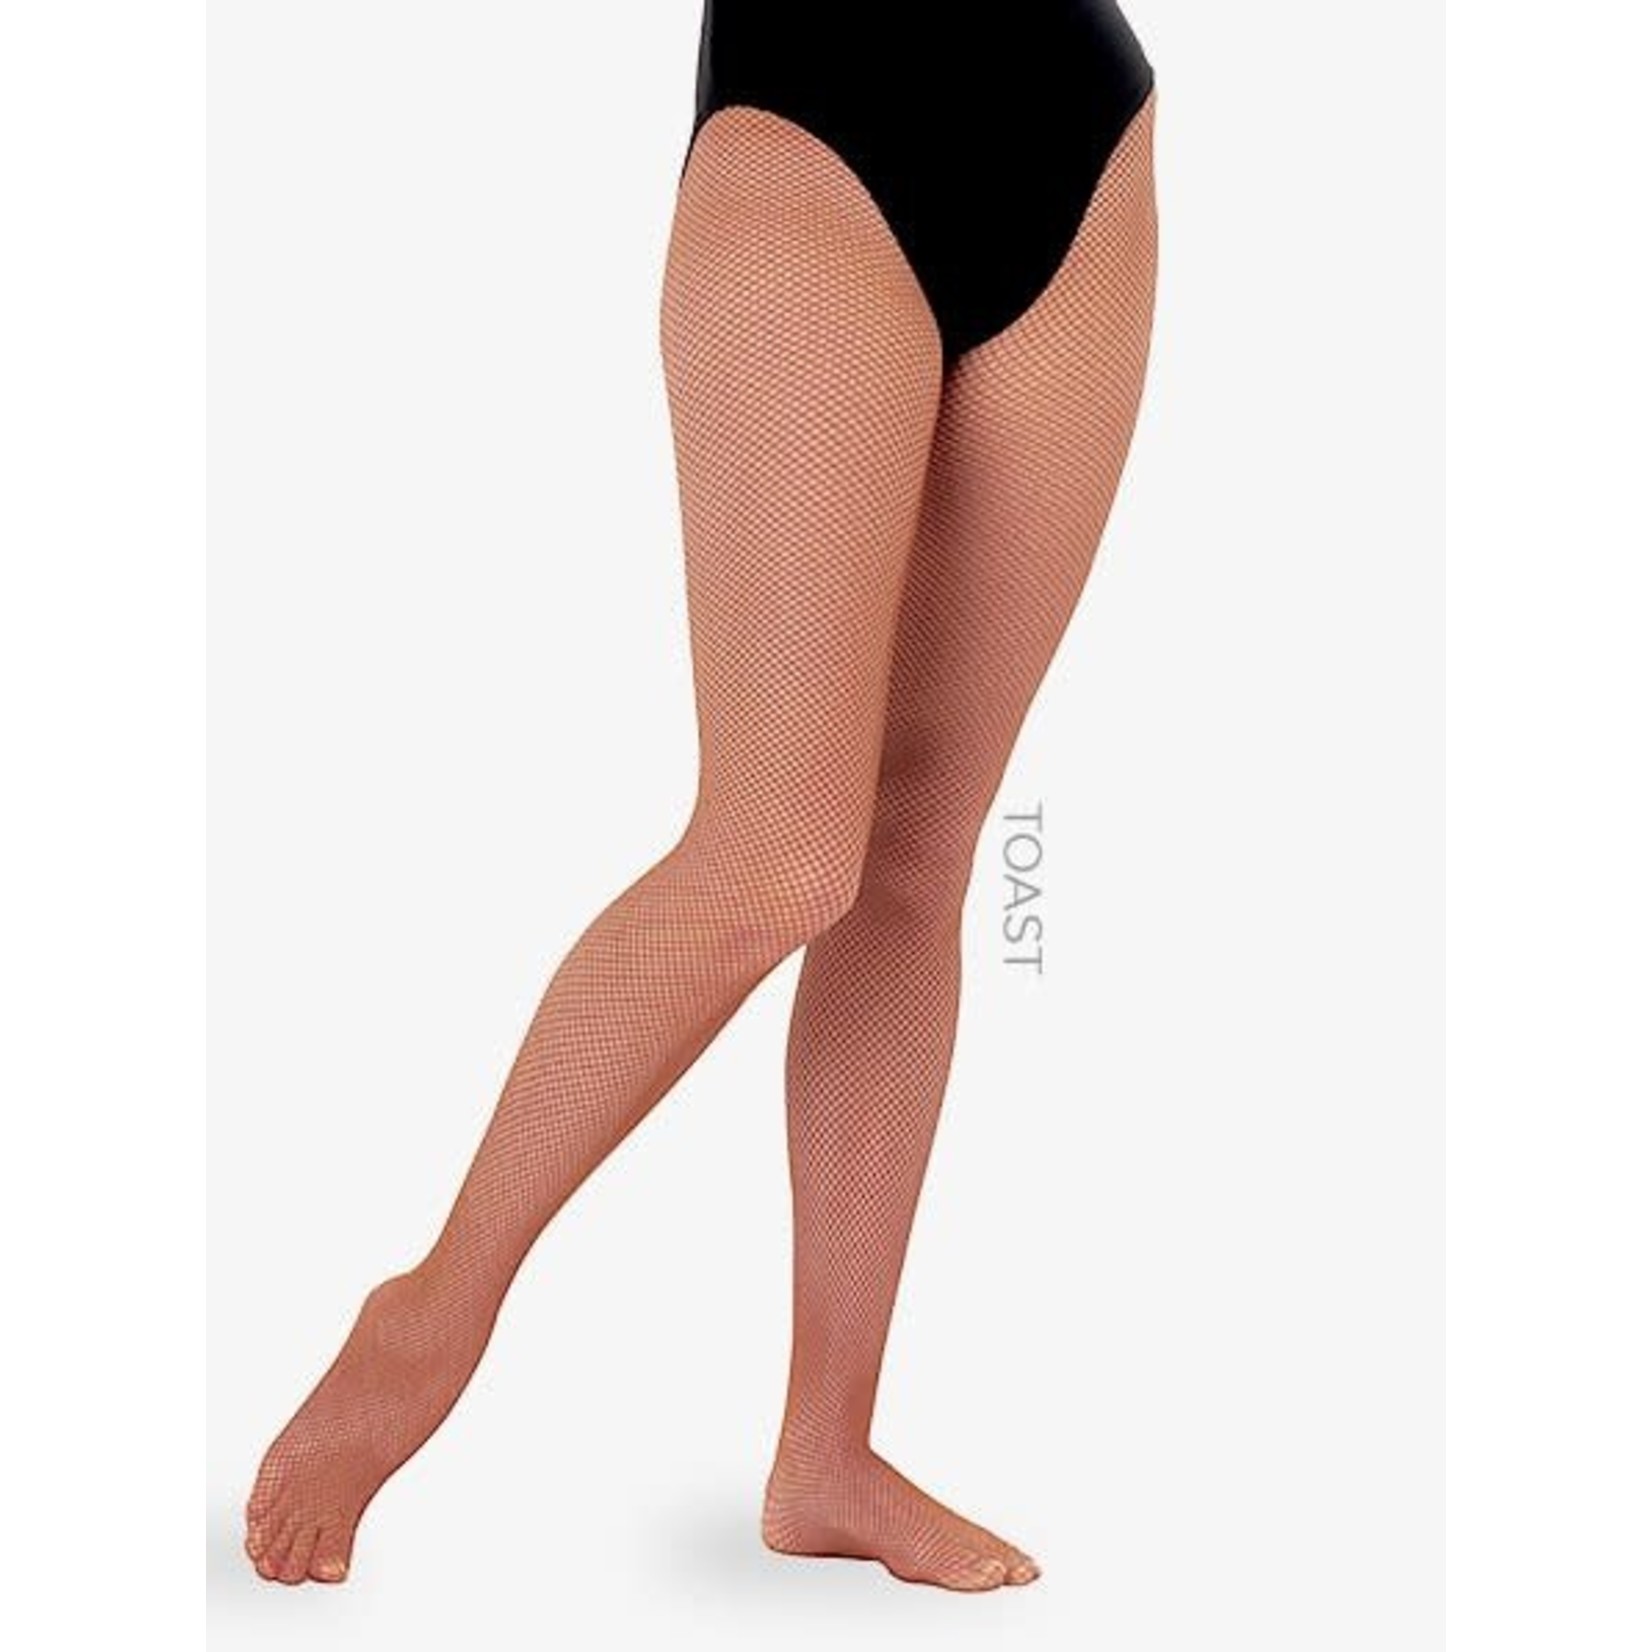 Body Wrappers Adult Seamless Fishnet Tights